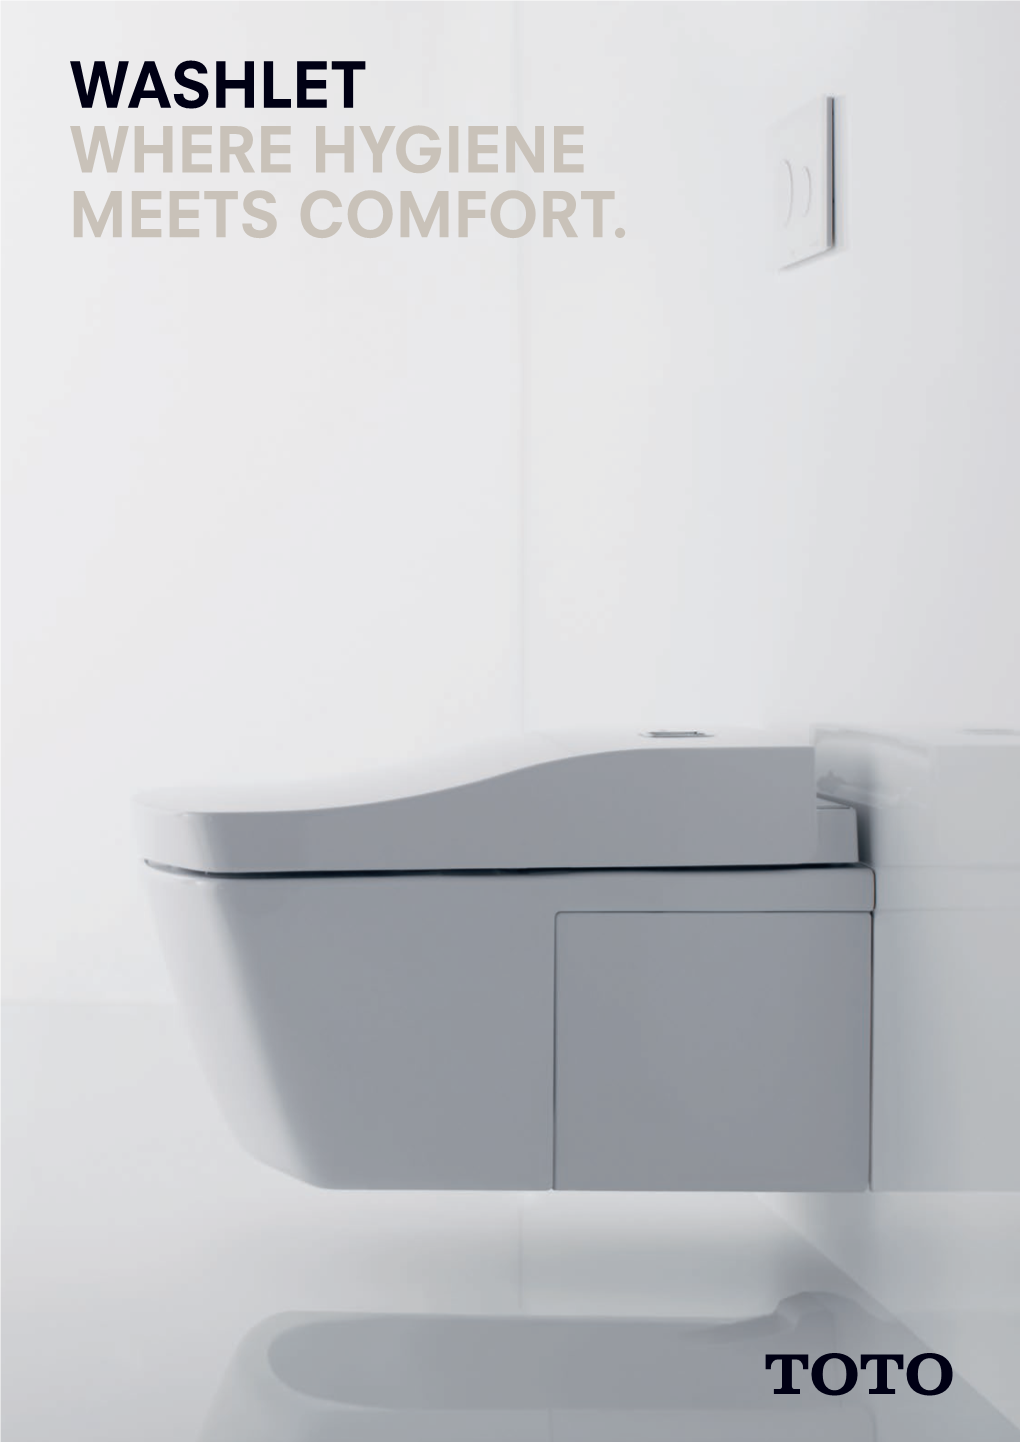 Washlet WHERE HYGIENE MEETS COMFORT. OUR TECHNOLOGIES